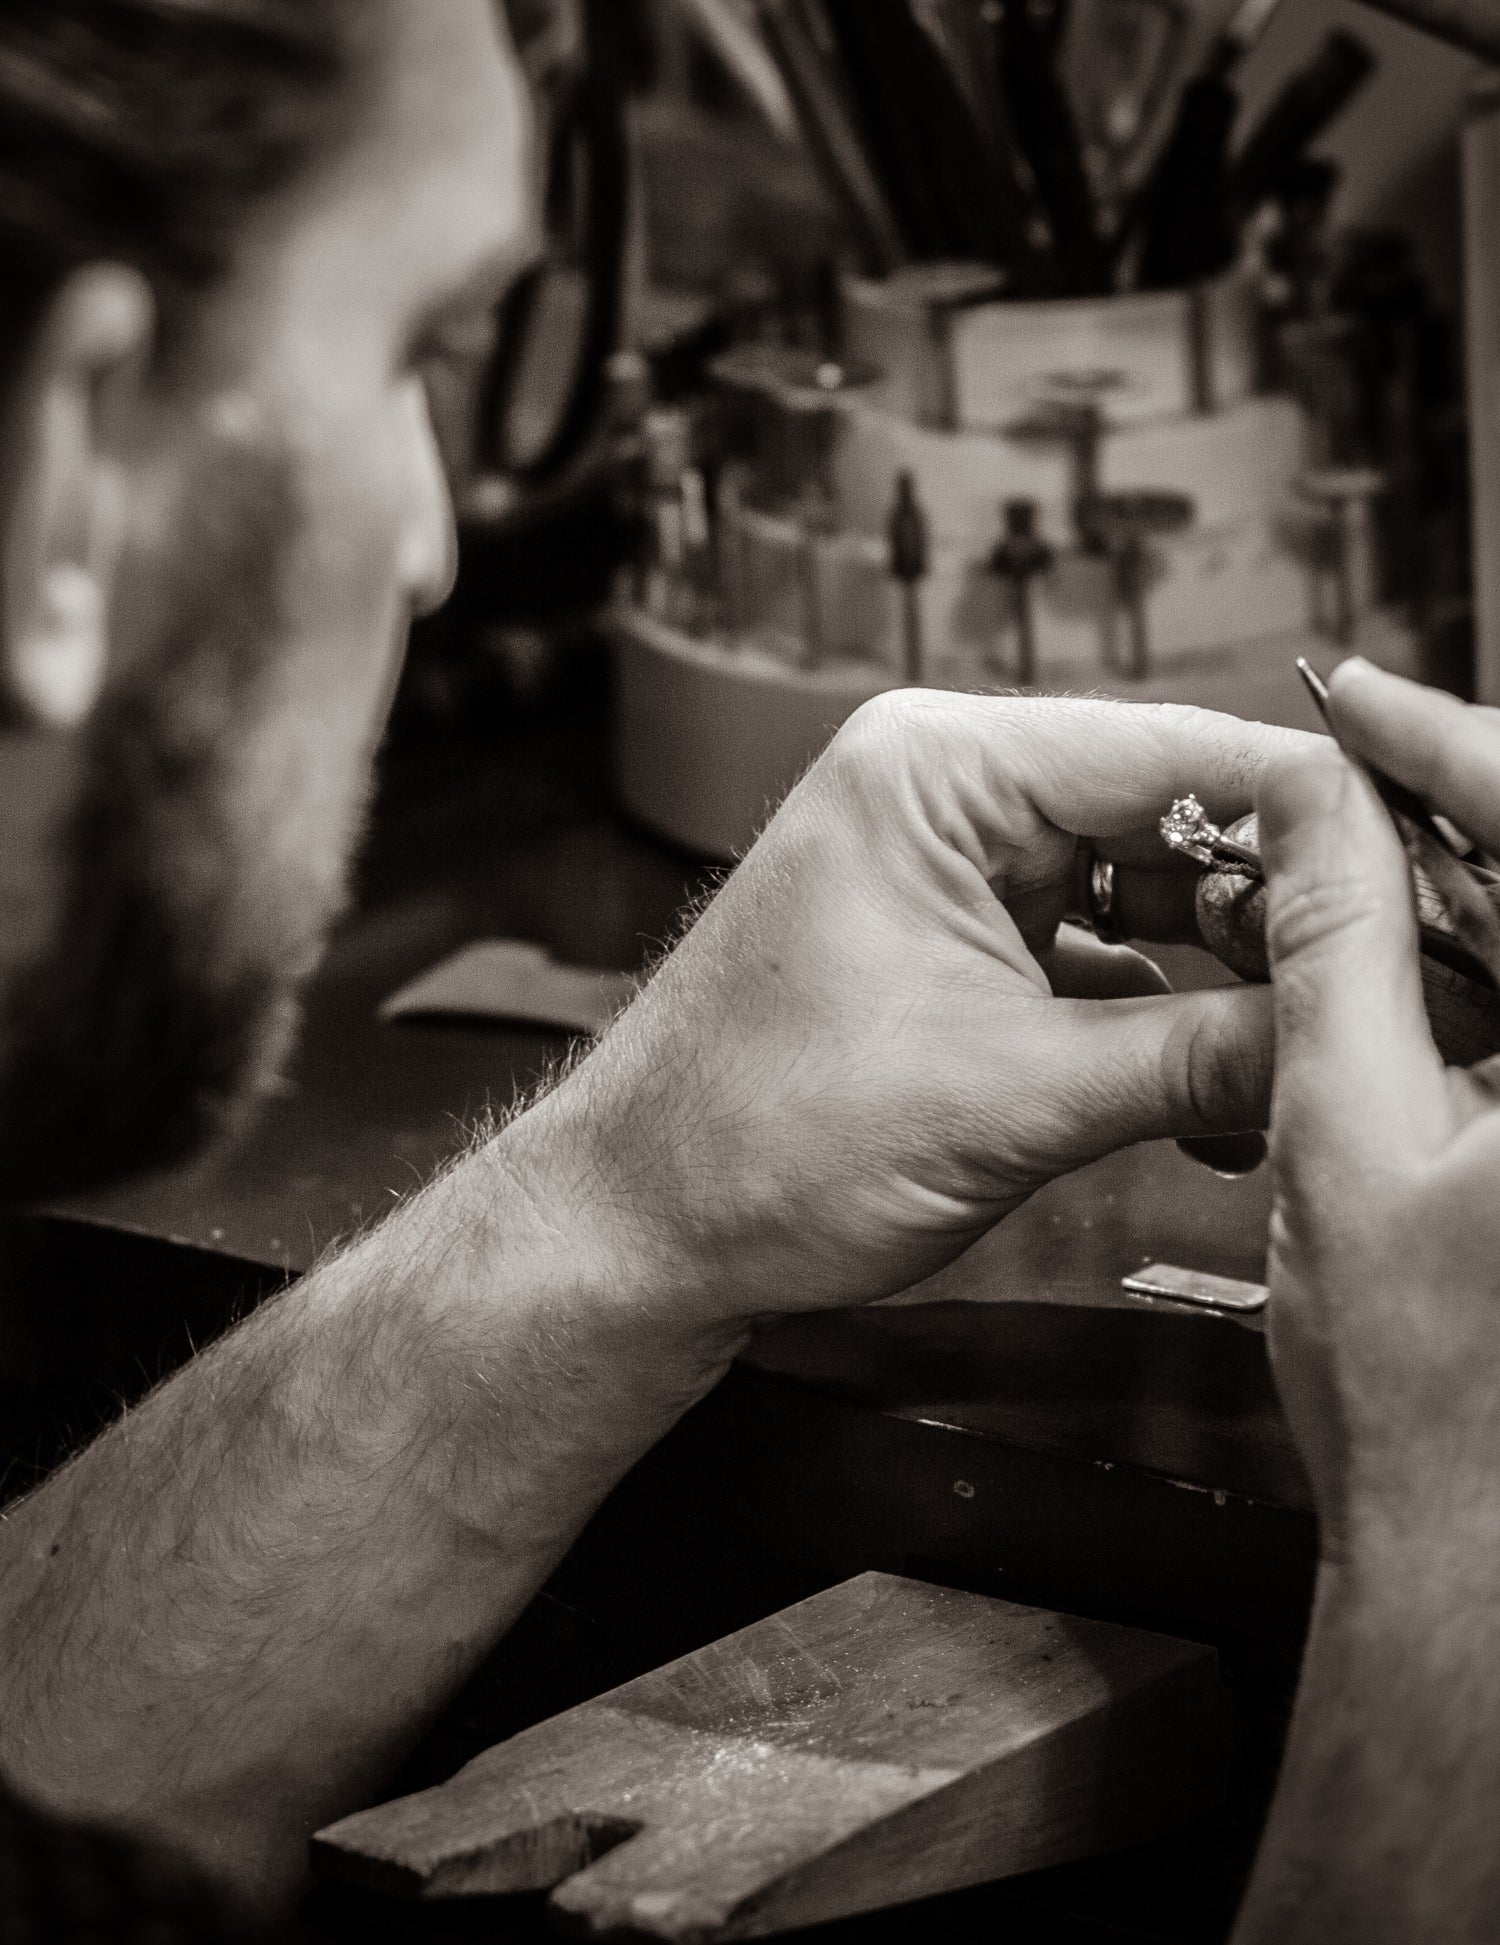 Master metalsmith Will from ethical jewelers W.R. Metalarts in his workshop setting a stone in a handcrafted diamond ring.